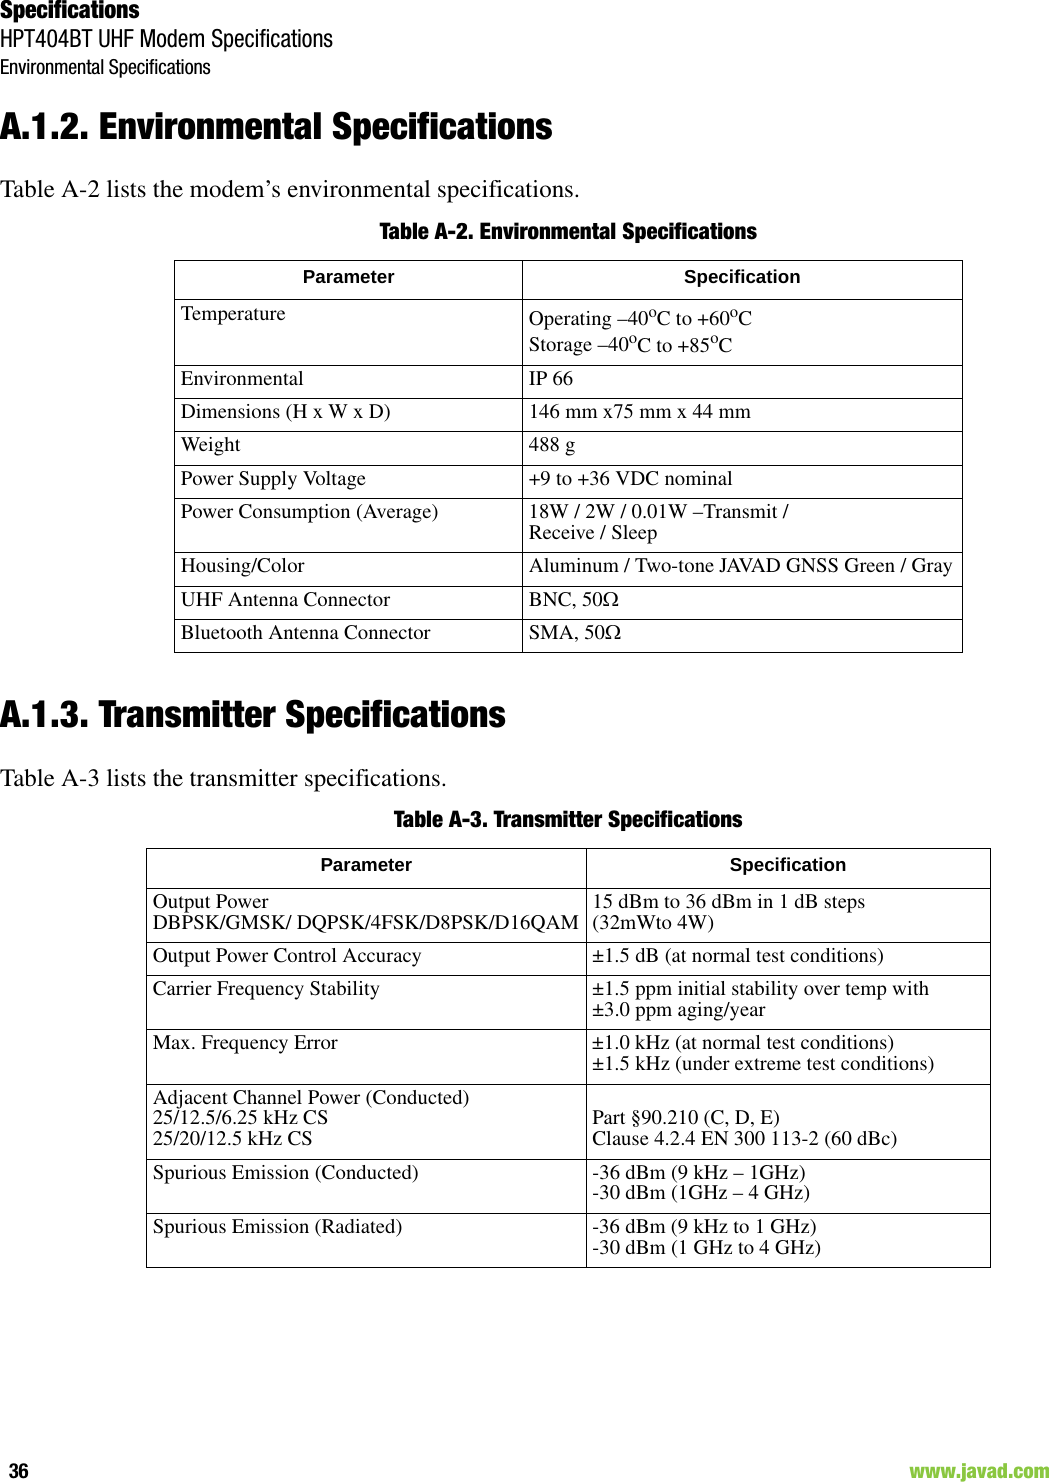 SpecificationsHPT404BT UHF Modem SpecificationsEnvironmental Specifications36                                                                                                                     www.javad.comA.1.2. Environmental SpecificationsTable A-2 lists the modem’s environmental specifications.Table A-2. Environmental SpecificationsA.1.3. Transmitter SpecificationsTable A-3 lists the transmitter specifications.Table A-3. Transmitter SpecificationsParameter SpecificationTemperature Operating –40oC to +60oCStorage –40oC to +85oCEnvironmental IP 66Dimensions (H x W x D) 146 mm x75 mm x 44 mmWeight 488 gPower Supply Voltage +9 to +36 VDC nominalPower Consumption (Average) 18W / 2W / 0.01W –Transmit / Receive / Sleep Housing/Color Aluminum / Two-tone JAVAD GNSS Green / GrayUHF Antenna Connector BNC, 50Bluetooth Antenna Connector SMA, 50Parameter SpecificationOutput Power DBPSK/GMSK/ DQPSK/4FSK/D8PSK/D16QAM 15 dBm to 36 dBm in 1 dB steps (32mWto 4W)Output Power Control Accuracy ±1.5 dB (at normal test conditions)Carrier Frequency Stability ±1.5 ppm initial stability over temp with±3.0 ppm aging/yearMax. Frequency Error ±1.0 kHz (at normal test conditions)±1.5 kHz (under extreme test conditions)Adjacent Channel Power (Conducted)25/12.5/6.25 kHz CS         25/20/12.5 kHz CS  Part §90.210 (C, D, E)Clause 4.2.4 EN 300 113-2 (60 dBc)Spurious Emission (Conducted) -36 dBm (9 kHz – 1GHz) -30 dBm (1GHz – 4 GHz)Spurious Emission (Radiated) -36 dBm (9 kHz to 1 GHz)-30 dBm (1 GHz to 4 GHz)